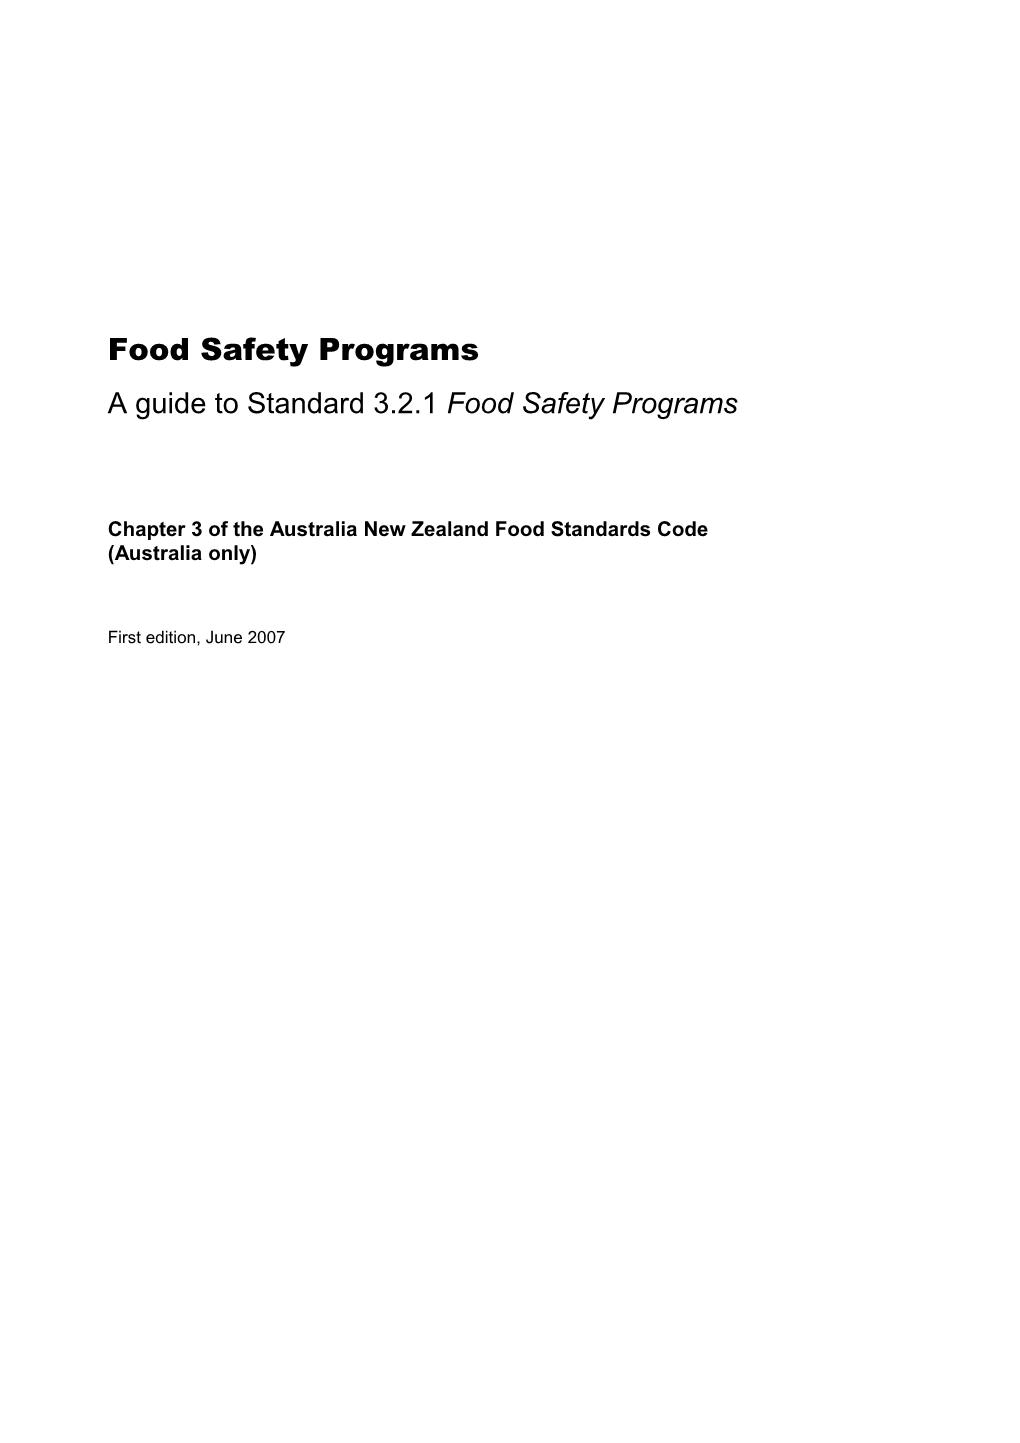 A Guide to Standard 3.2.1 Food Safety Programs